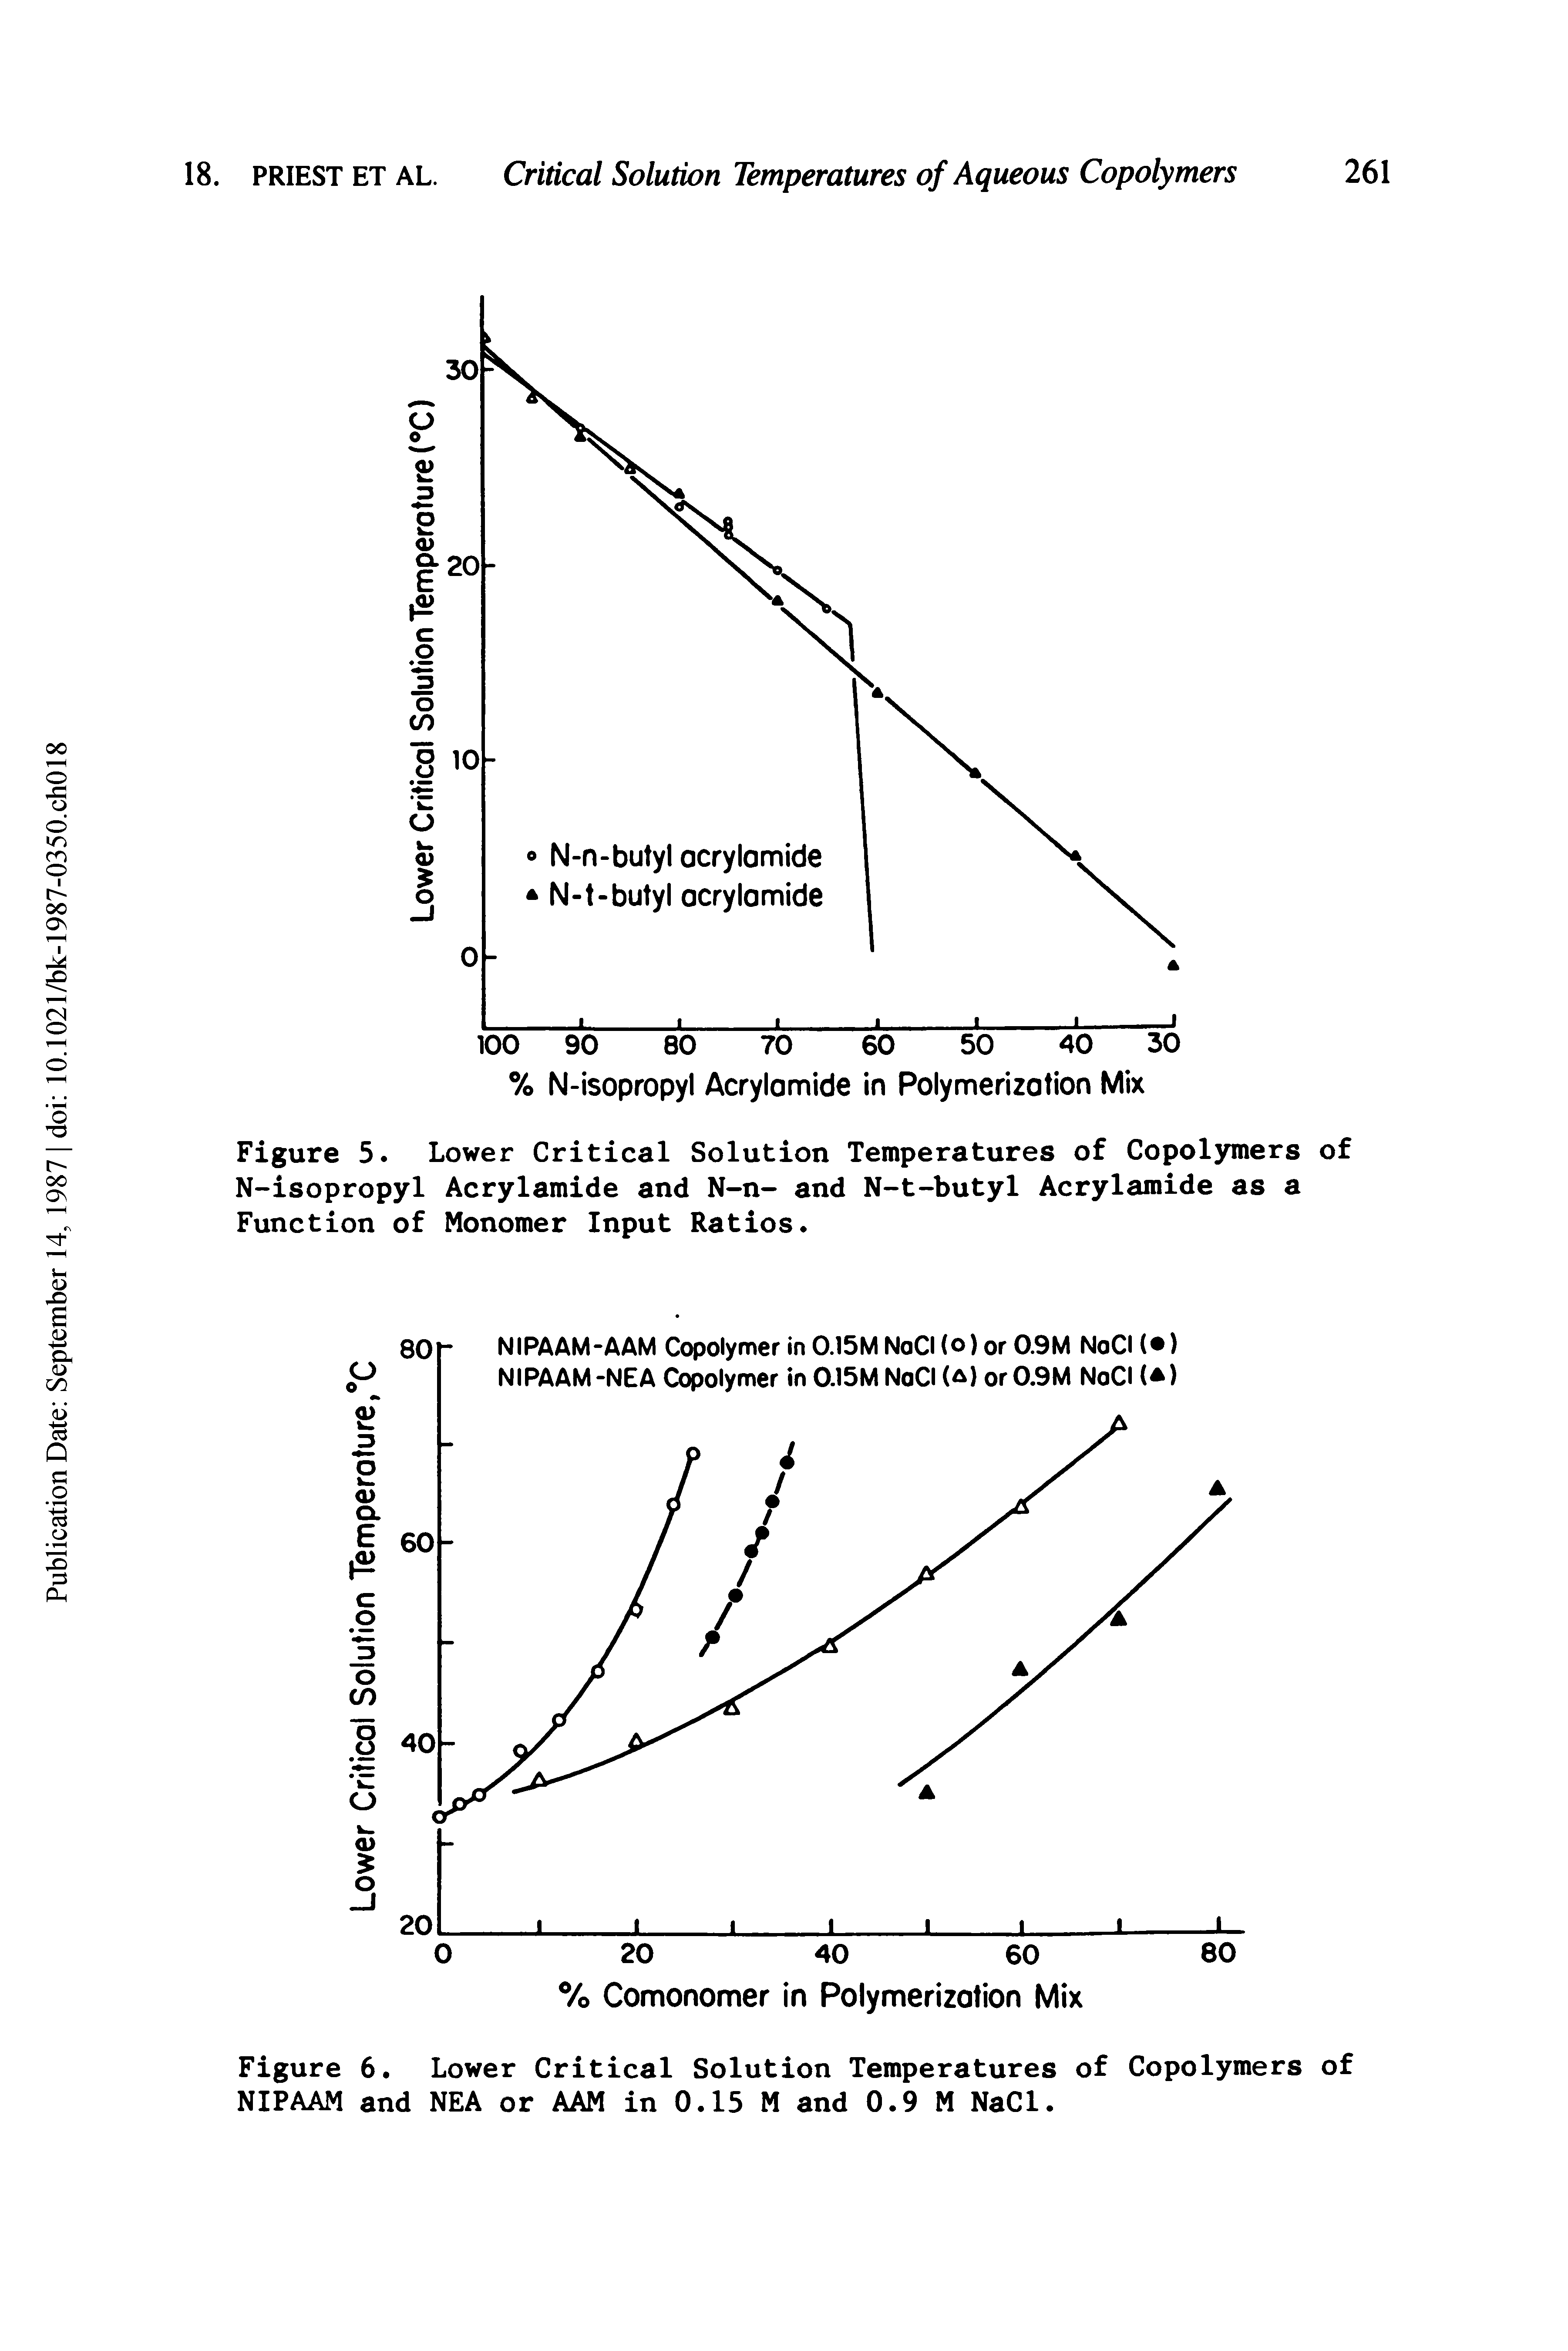 Figure 5. Lower Critical Solution Temperatures of Copolymers of N-isopropyl Acrylamide and N-n- and N-t-butyl Acrylamide as a Function of Monomer Input Ratios.